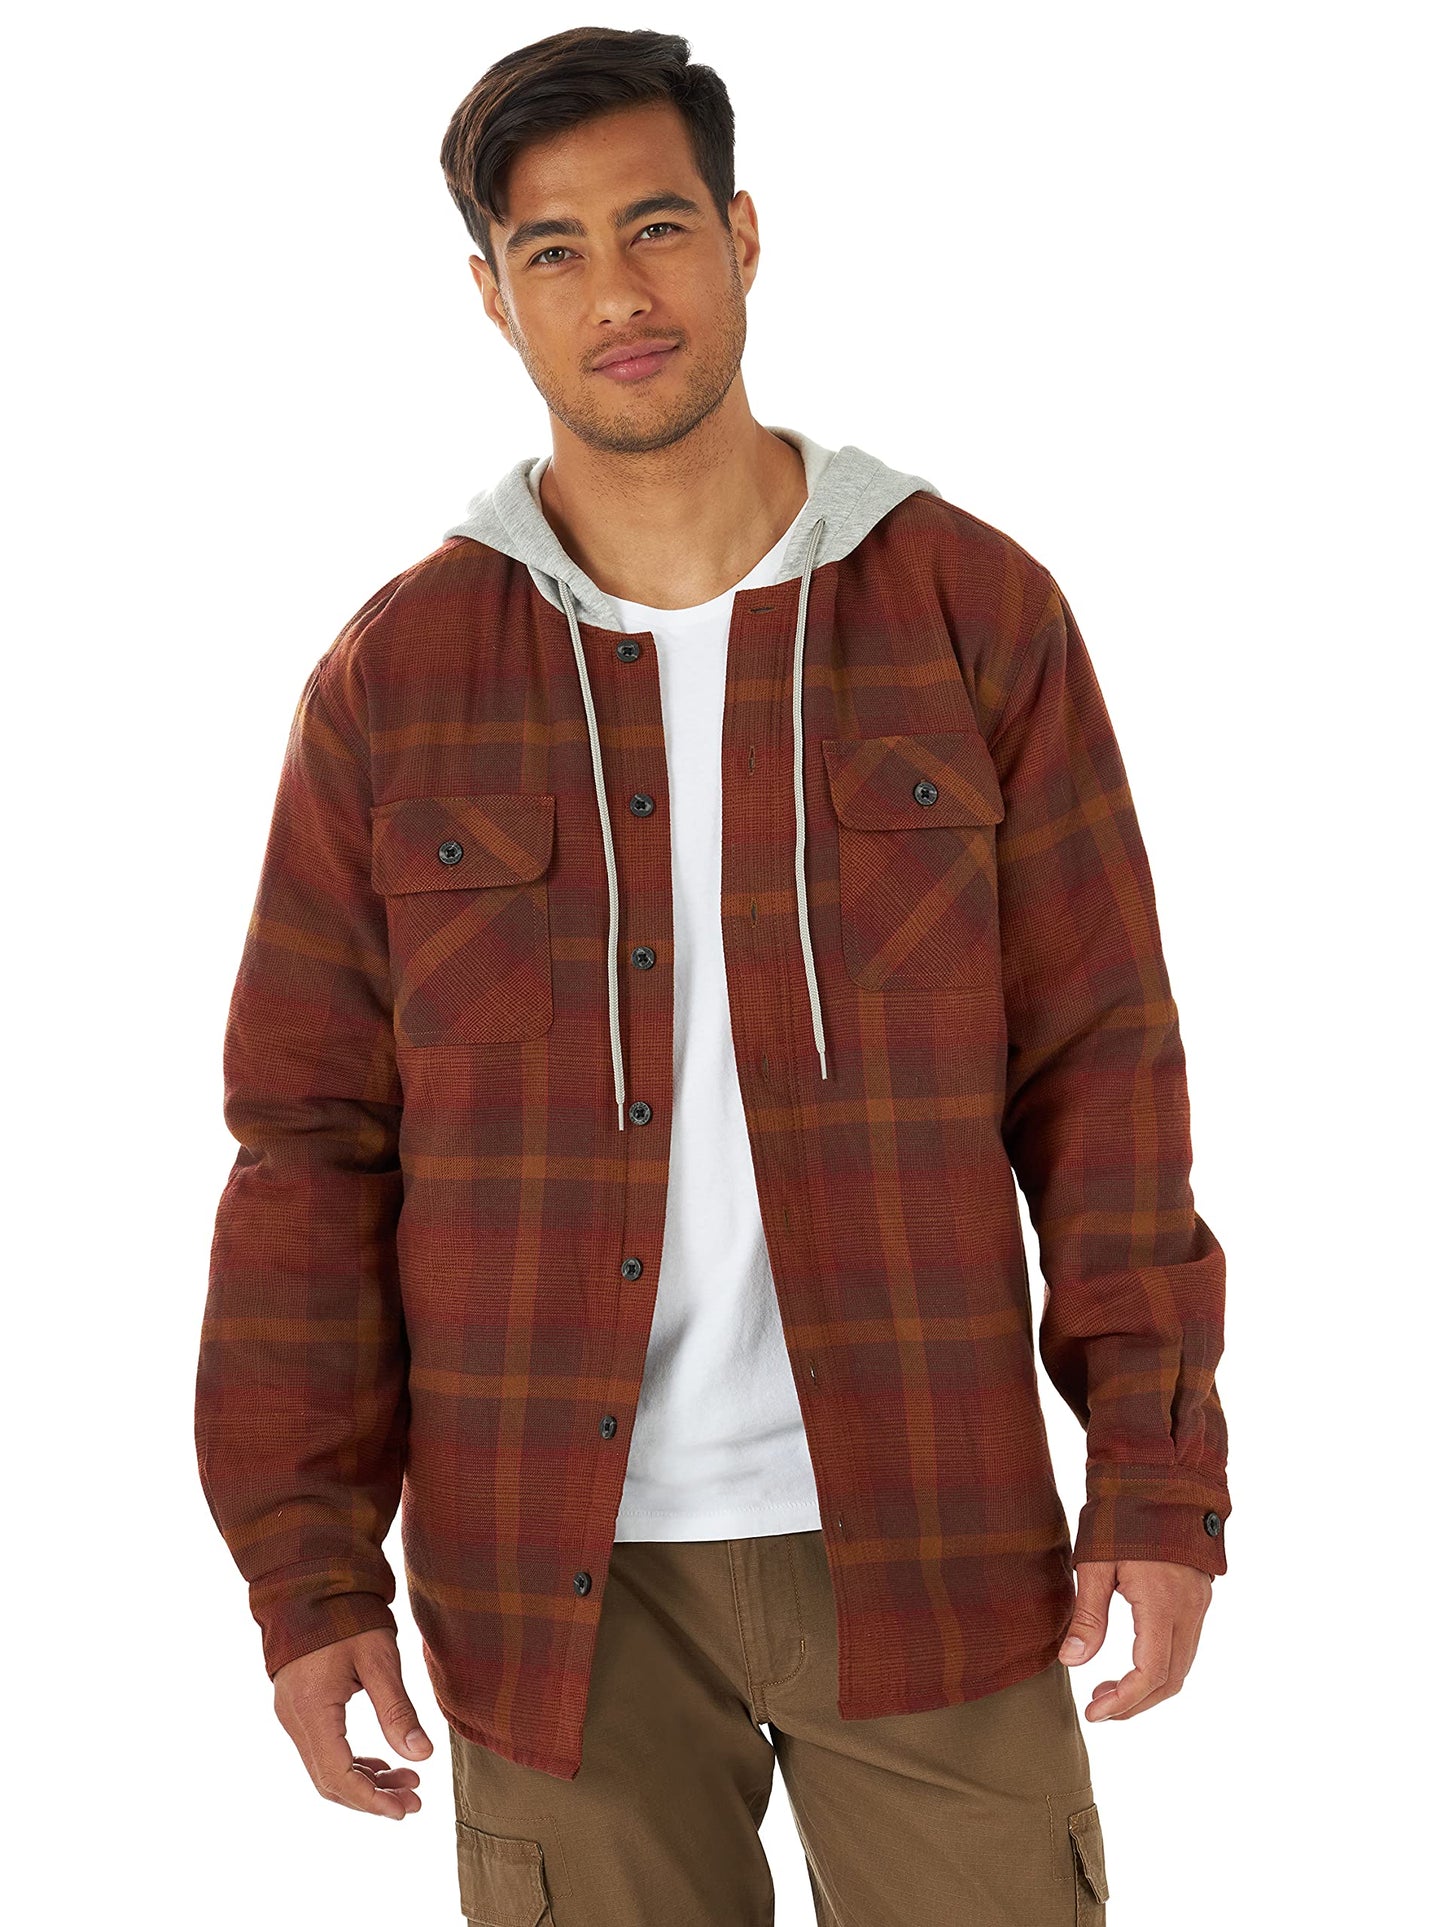 Wrangler Authentics Men's Long Sleeve Quilted Lined Flannel Shirt Jacket with Hood, Toffee, Medium